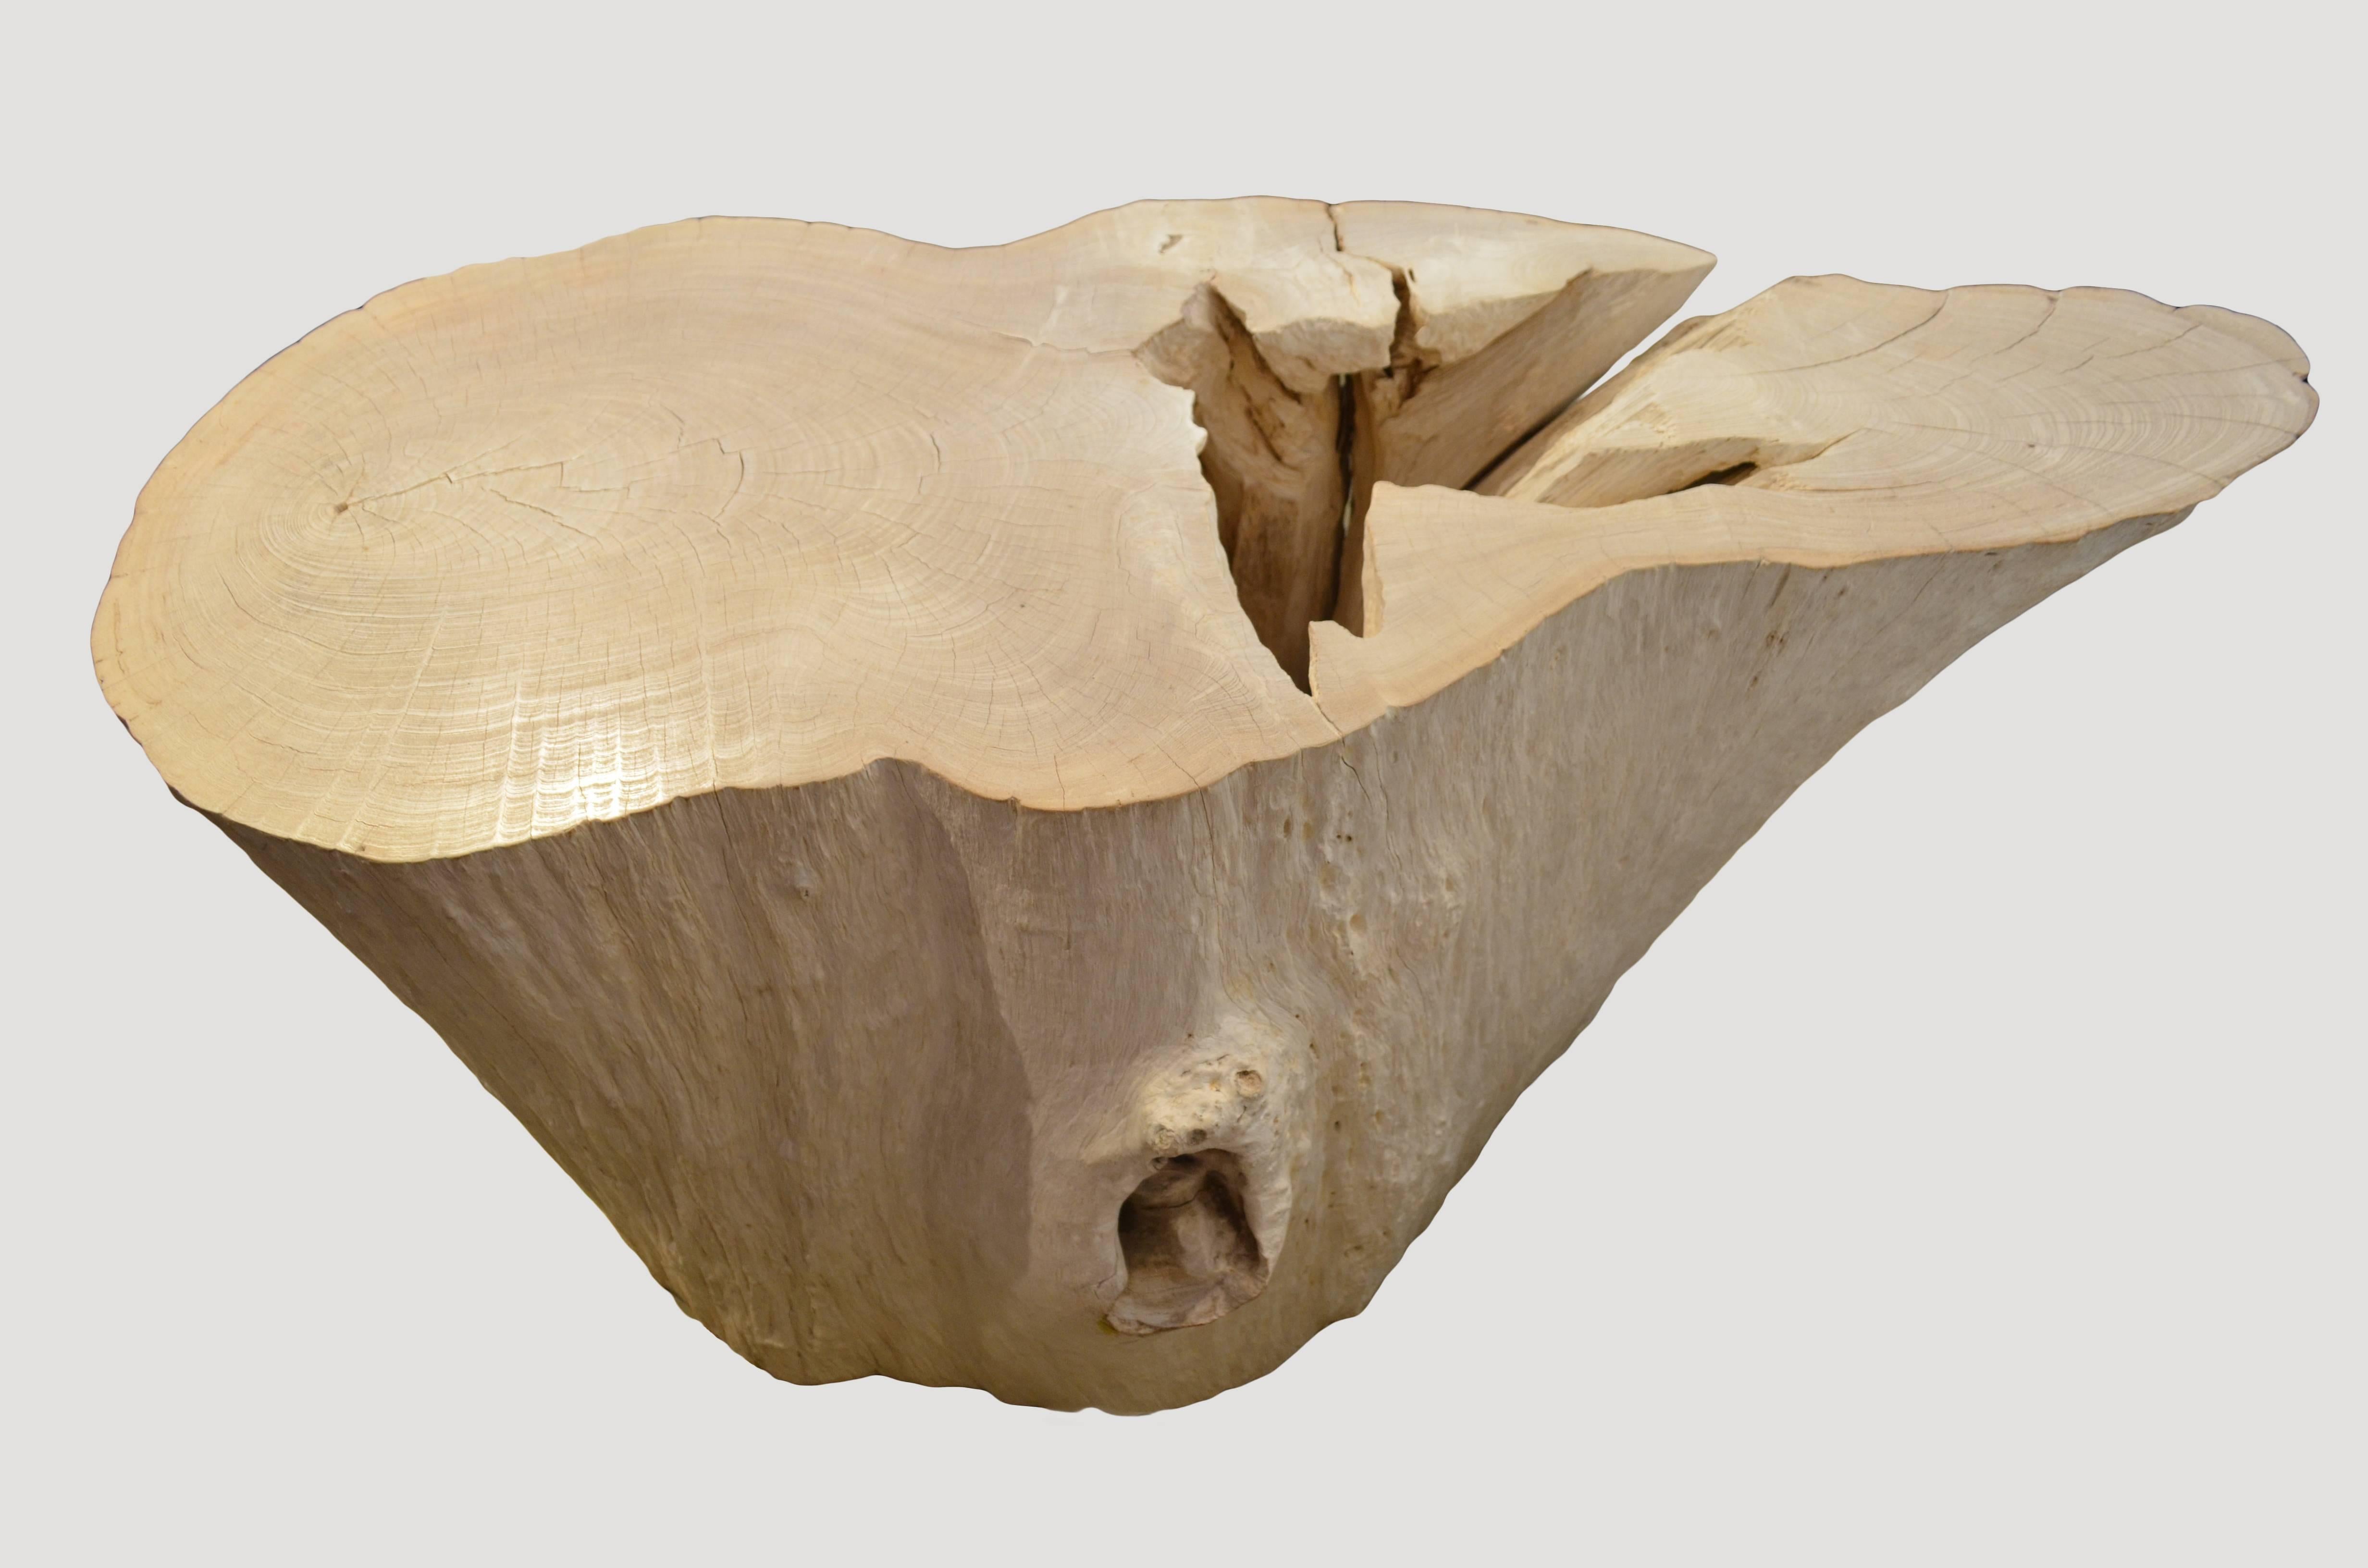 Beautiful erosion teak console or table base carved from a single root. Fabulous shape. Lucite or glass can be added if desired. A light shellack has been added to the top.

The St. Barts Collection features an exciting new line of organic white